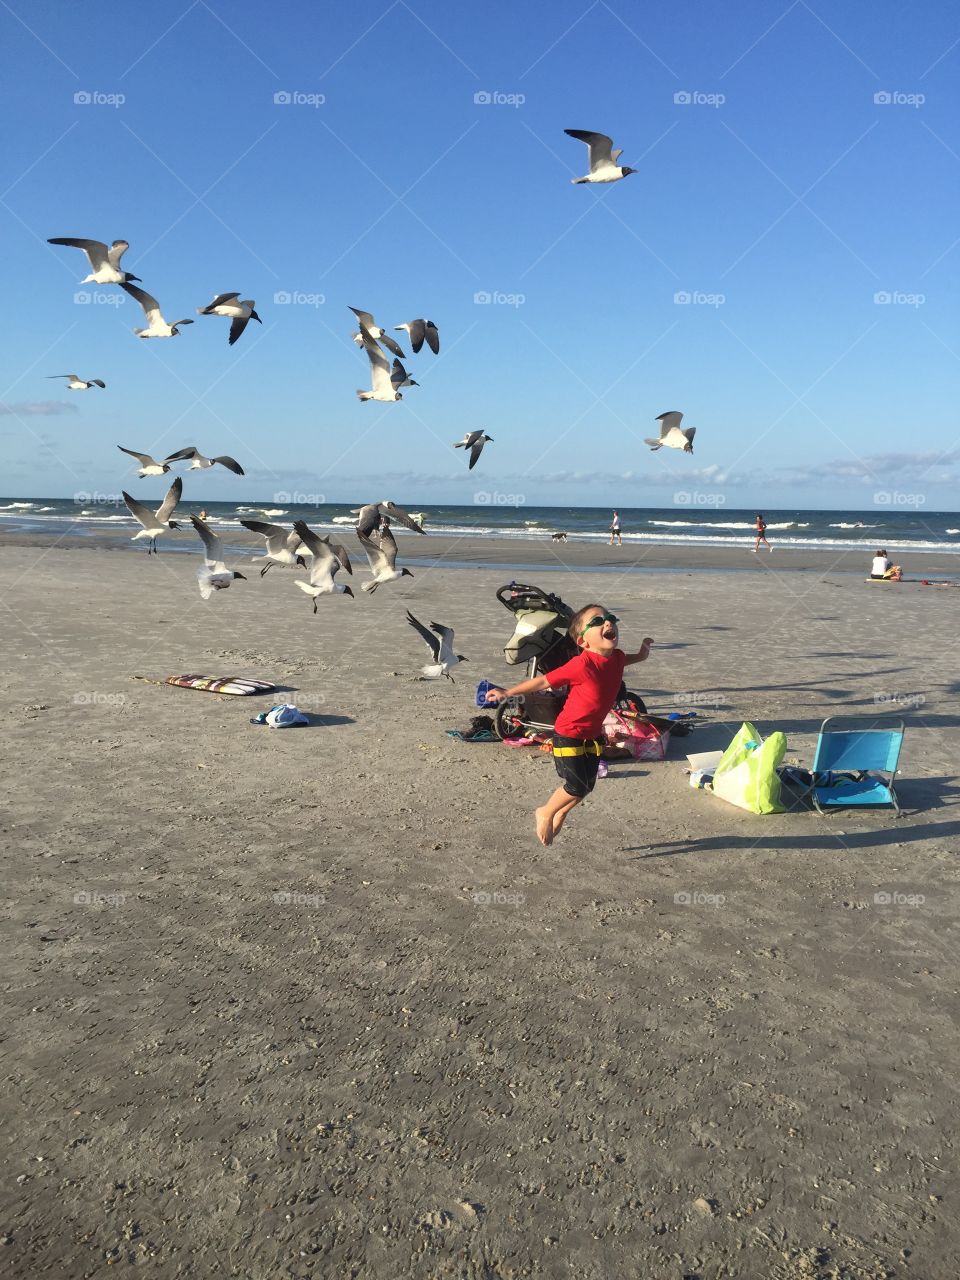 I believe I can fly. Beach with boy and seagulls